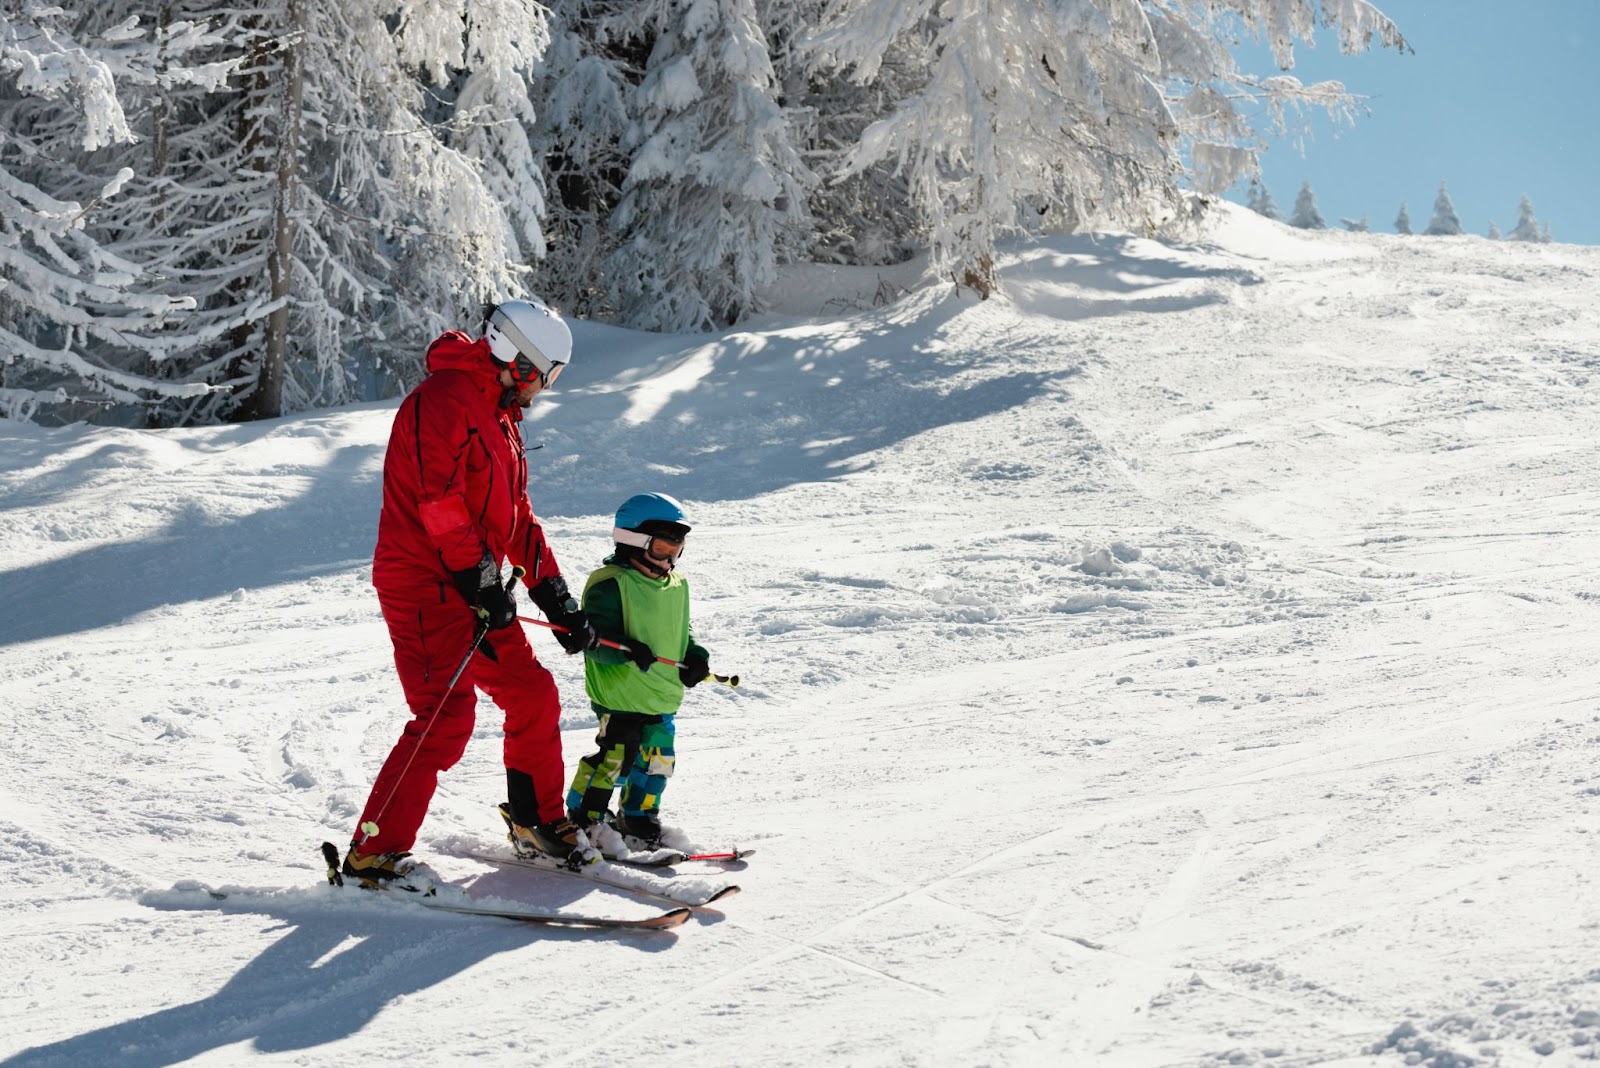 Nanny and child skiing down slope under blue sky.